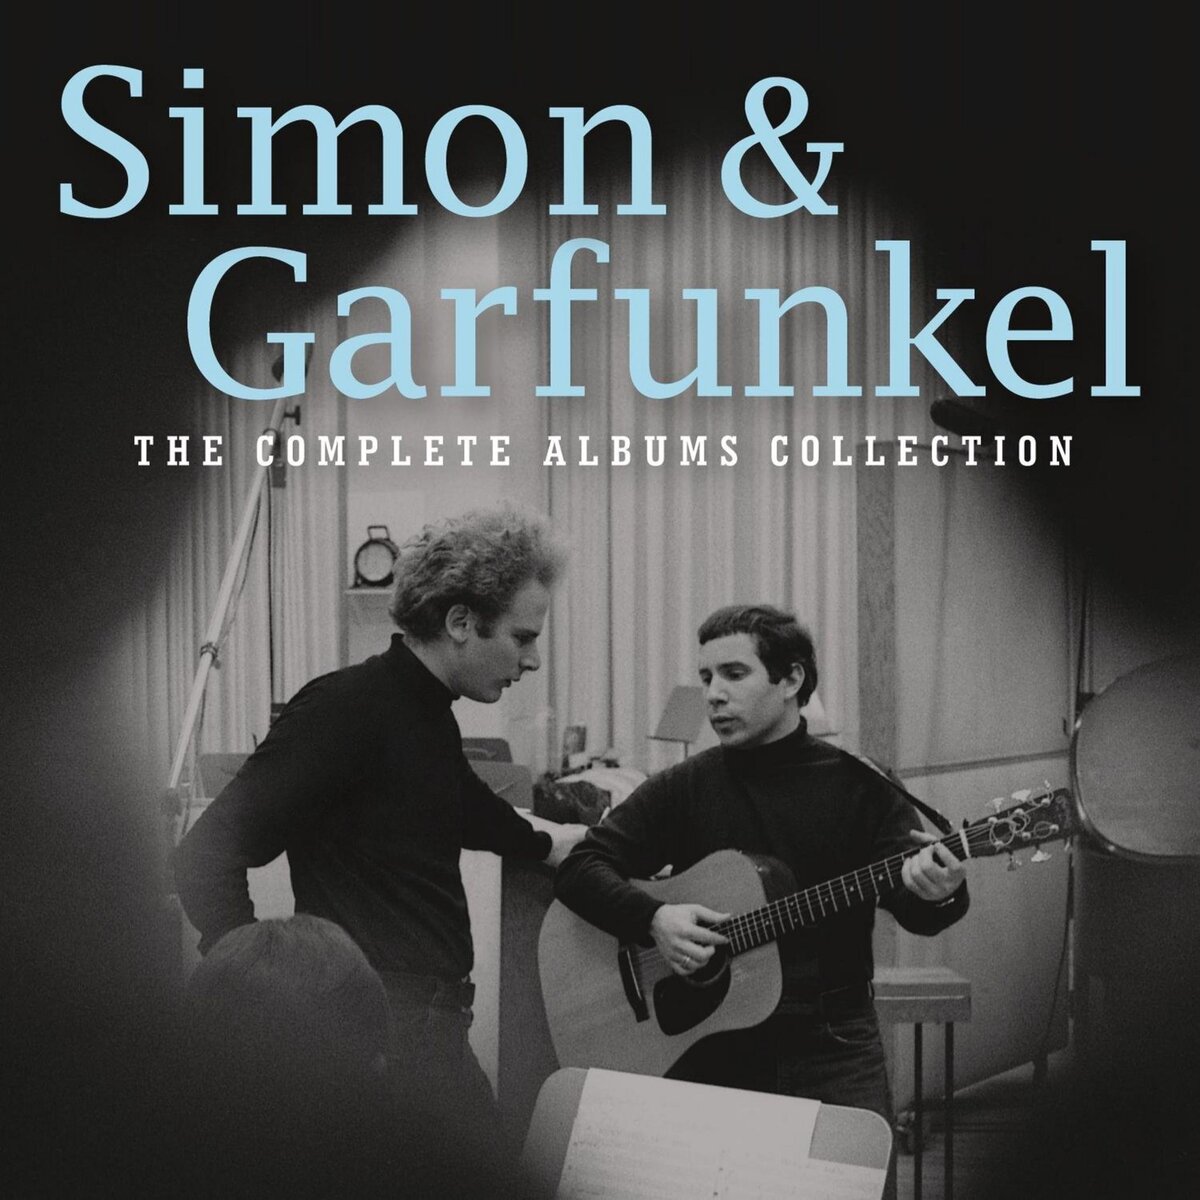 Sony Music SIMON & GARFUNKEL The complete albums collection